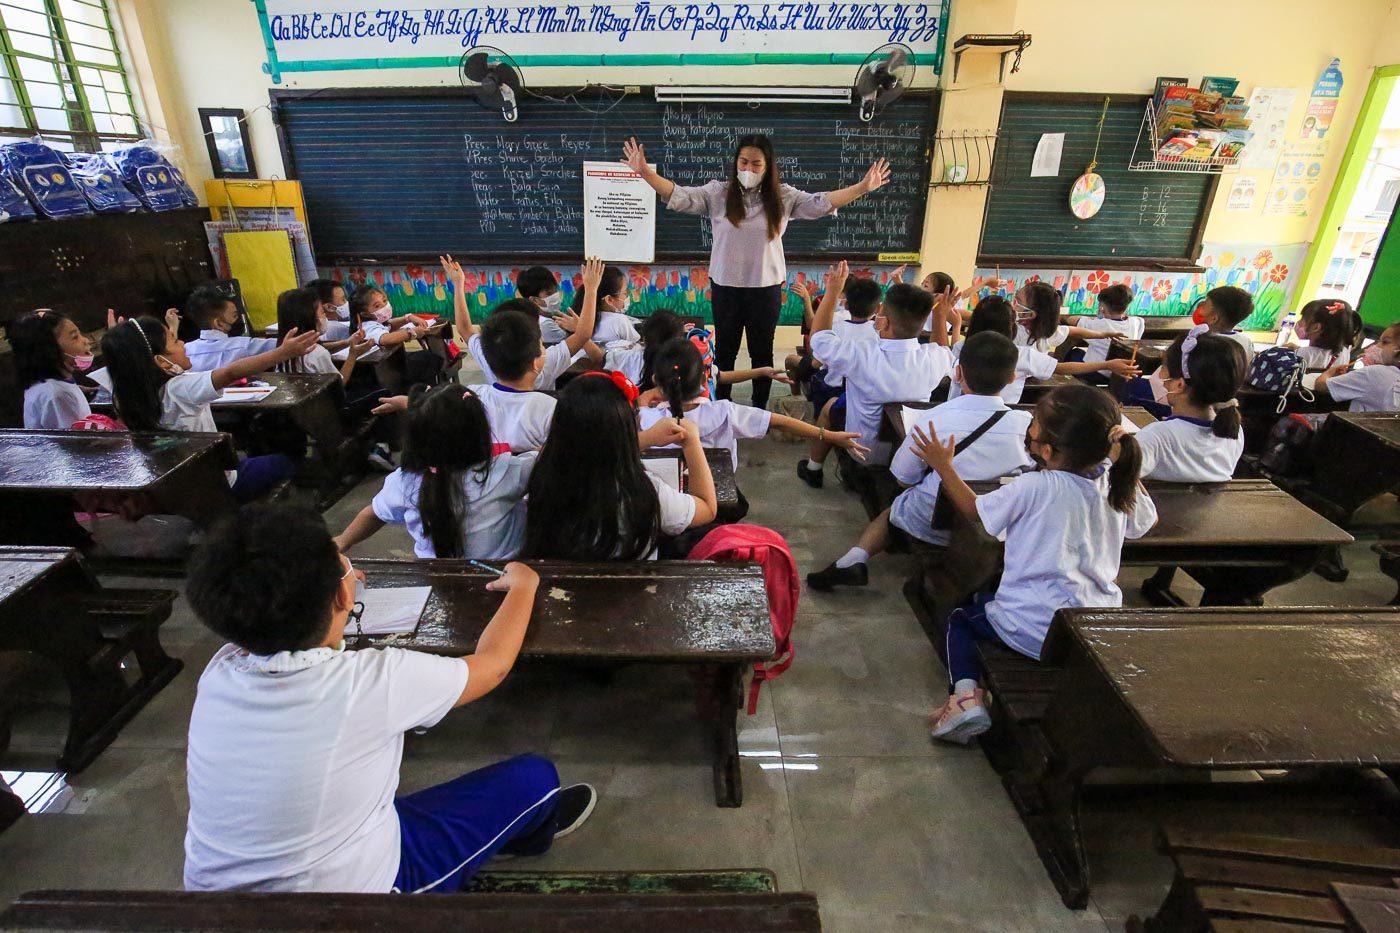 After 2 years of distance learning, PH schools return to face-to-face classes